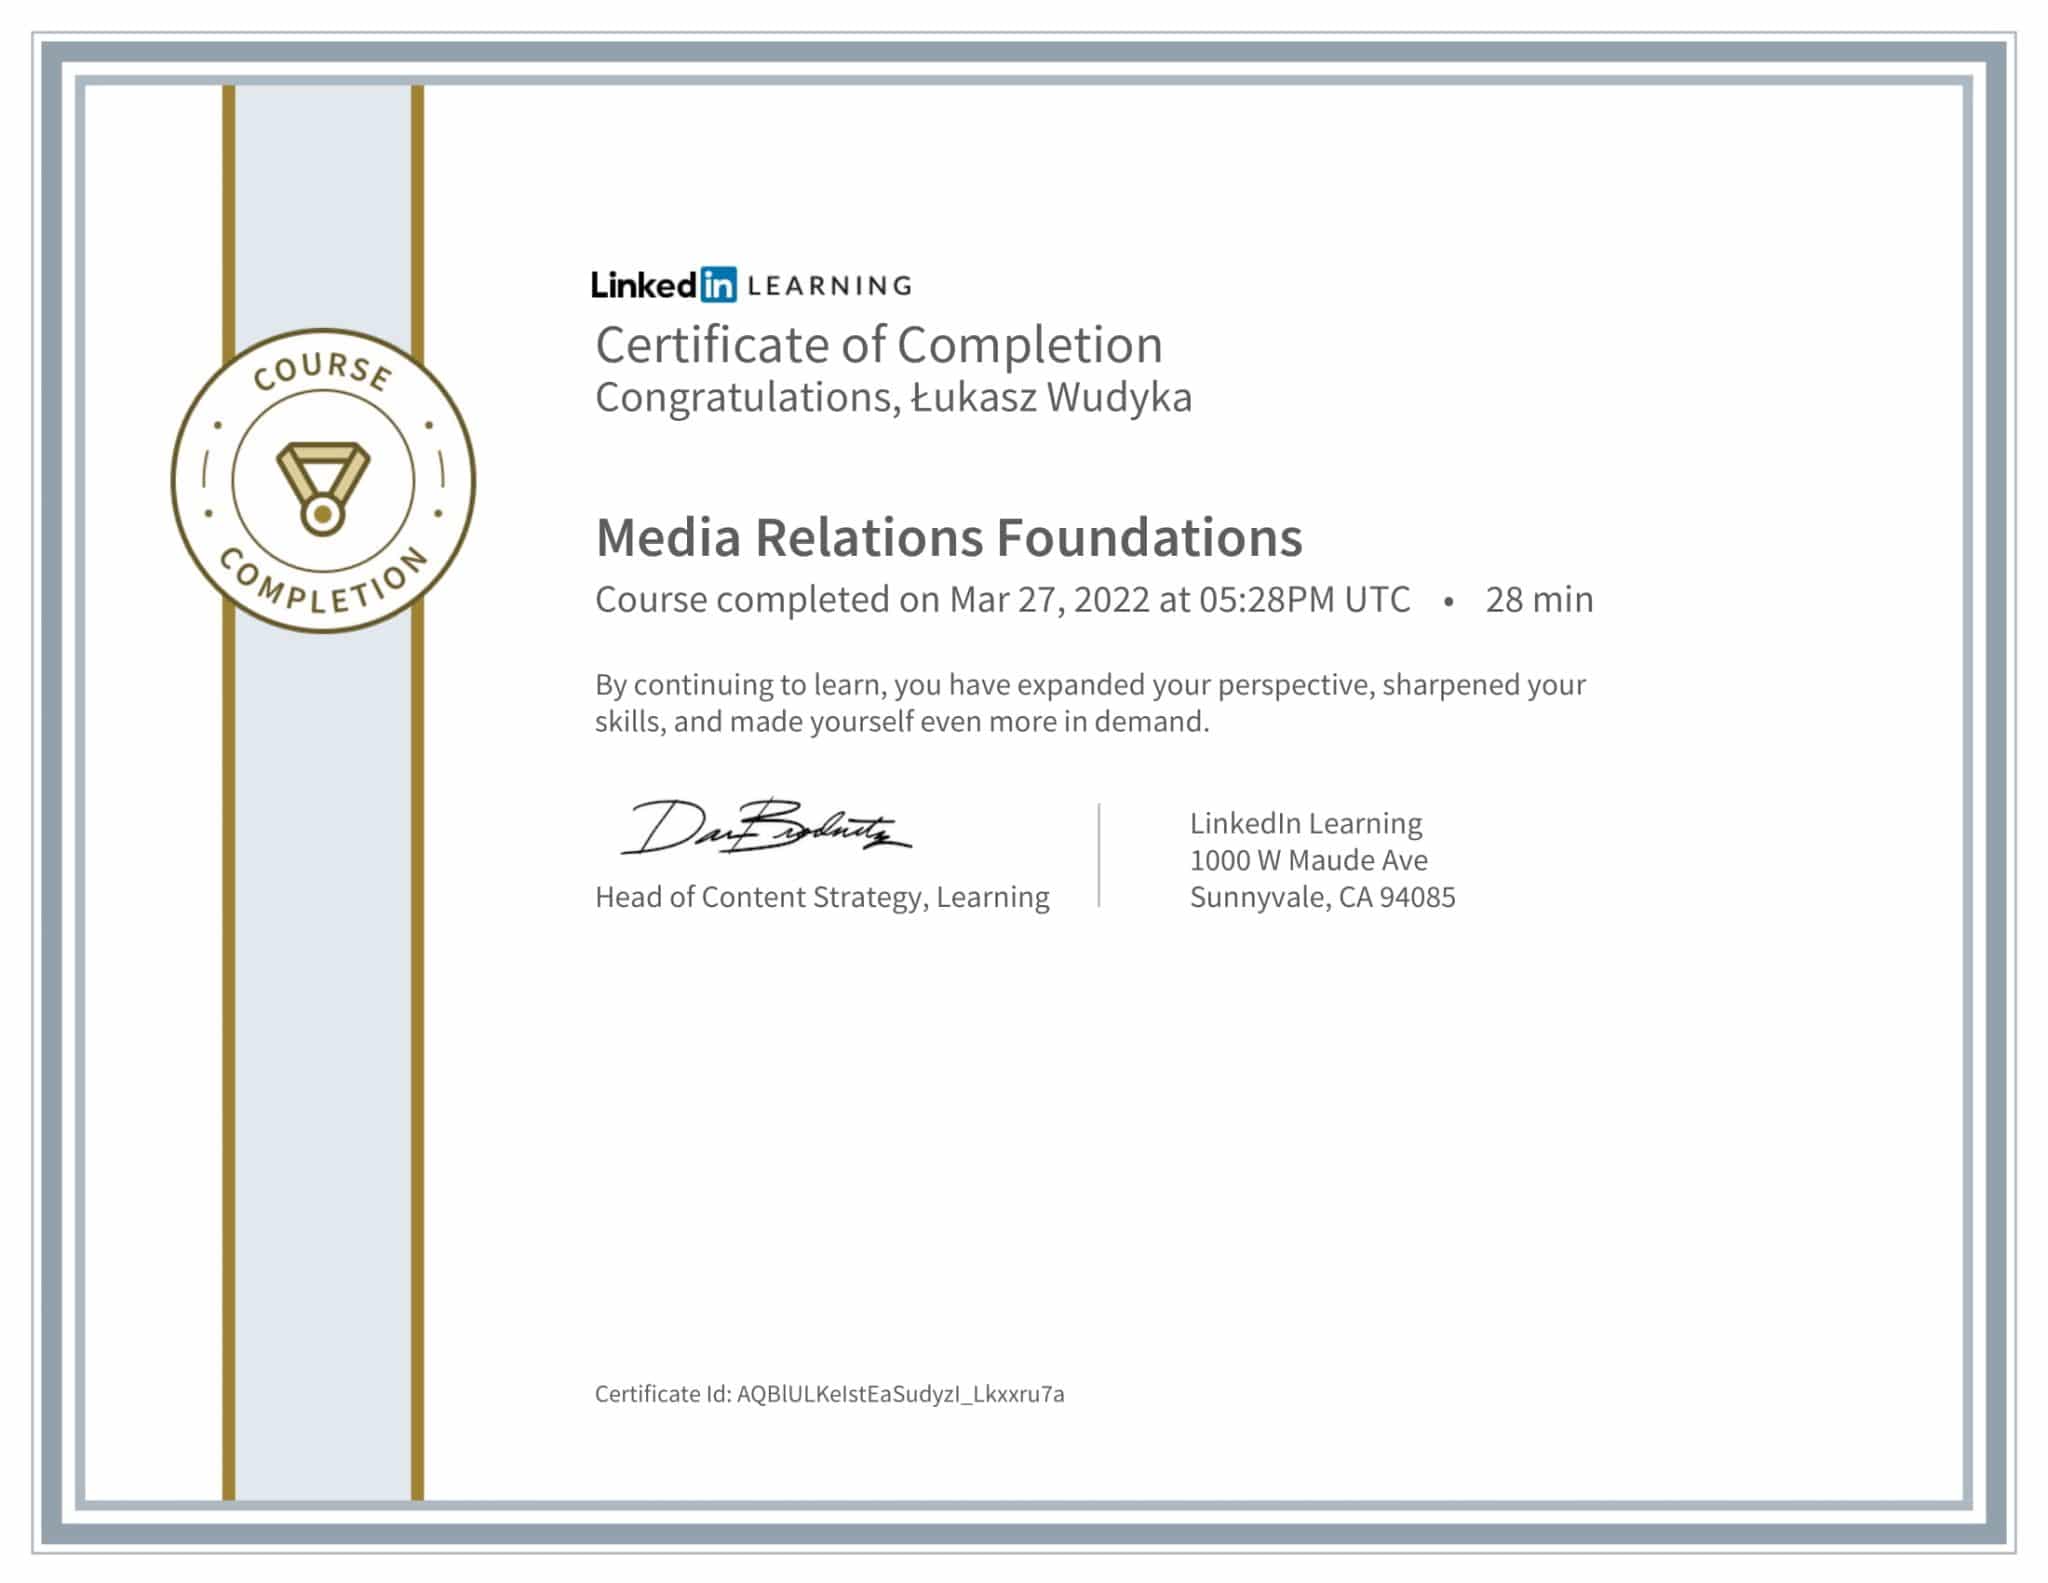 CertificateOfCompletion_Media Relations Foundations-1